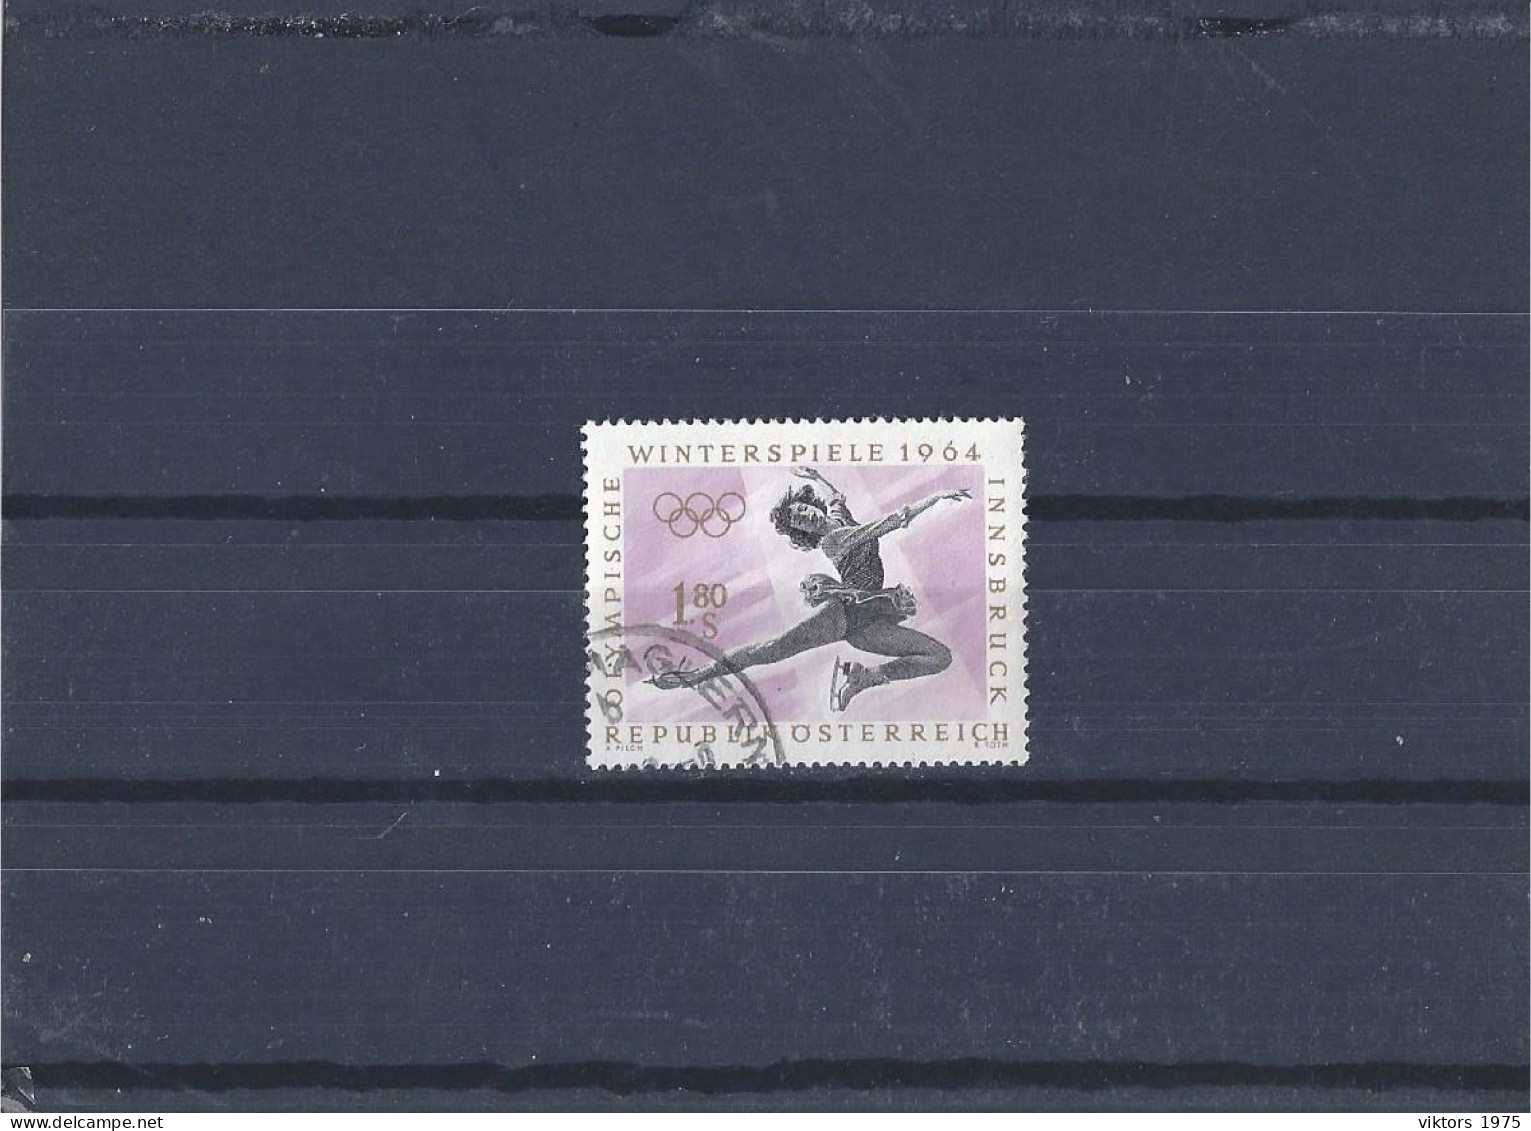 Used Stamp Nr.1139 In MICHEL Catalog - Used Stamps